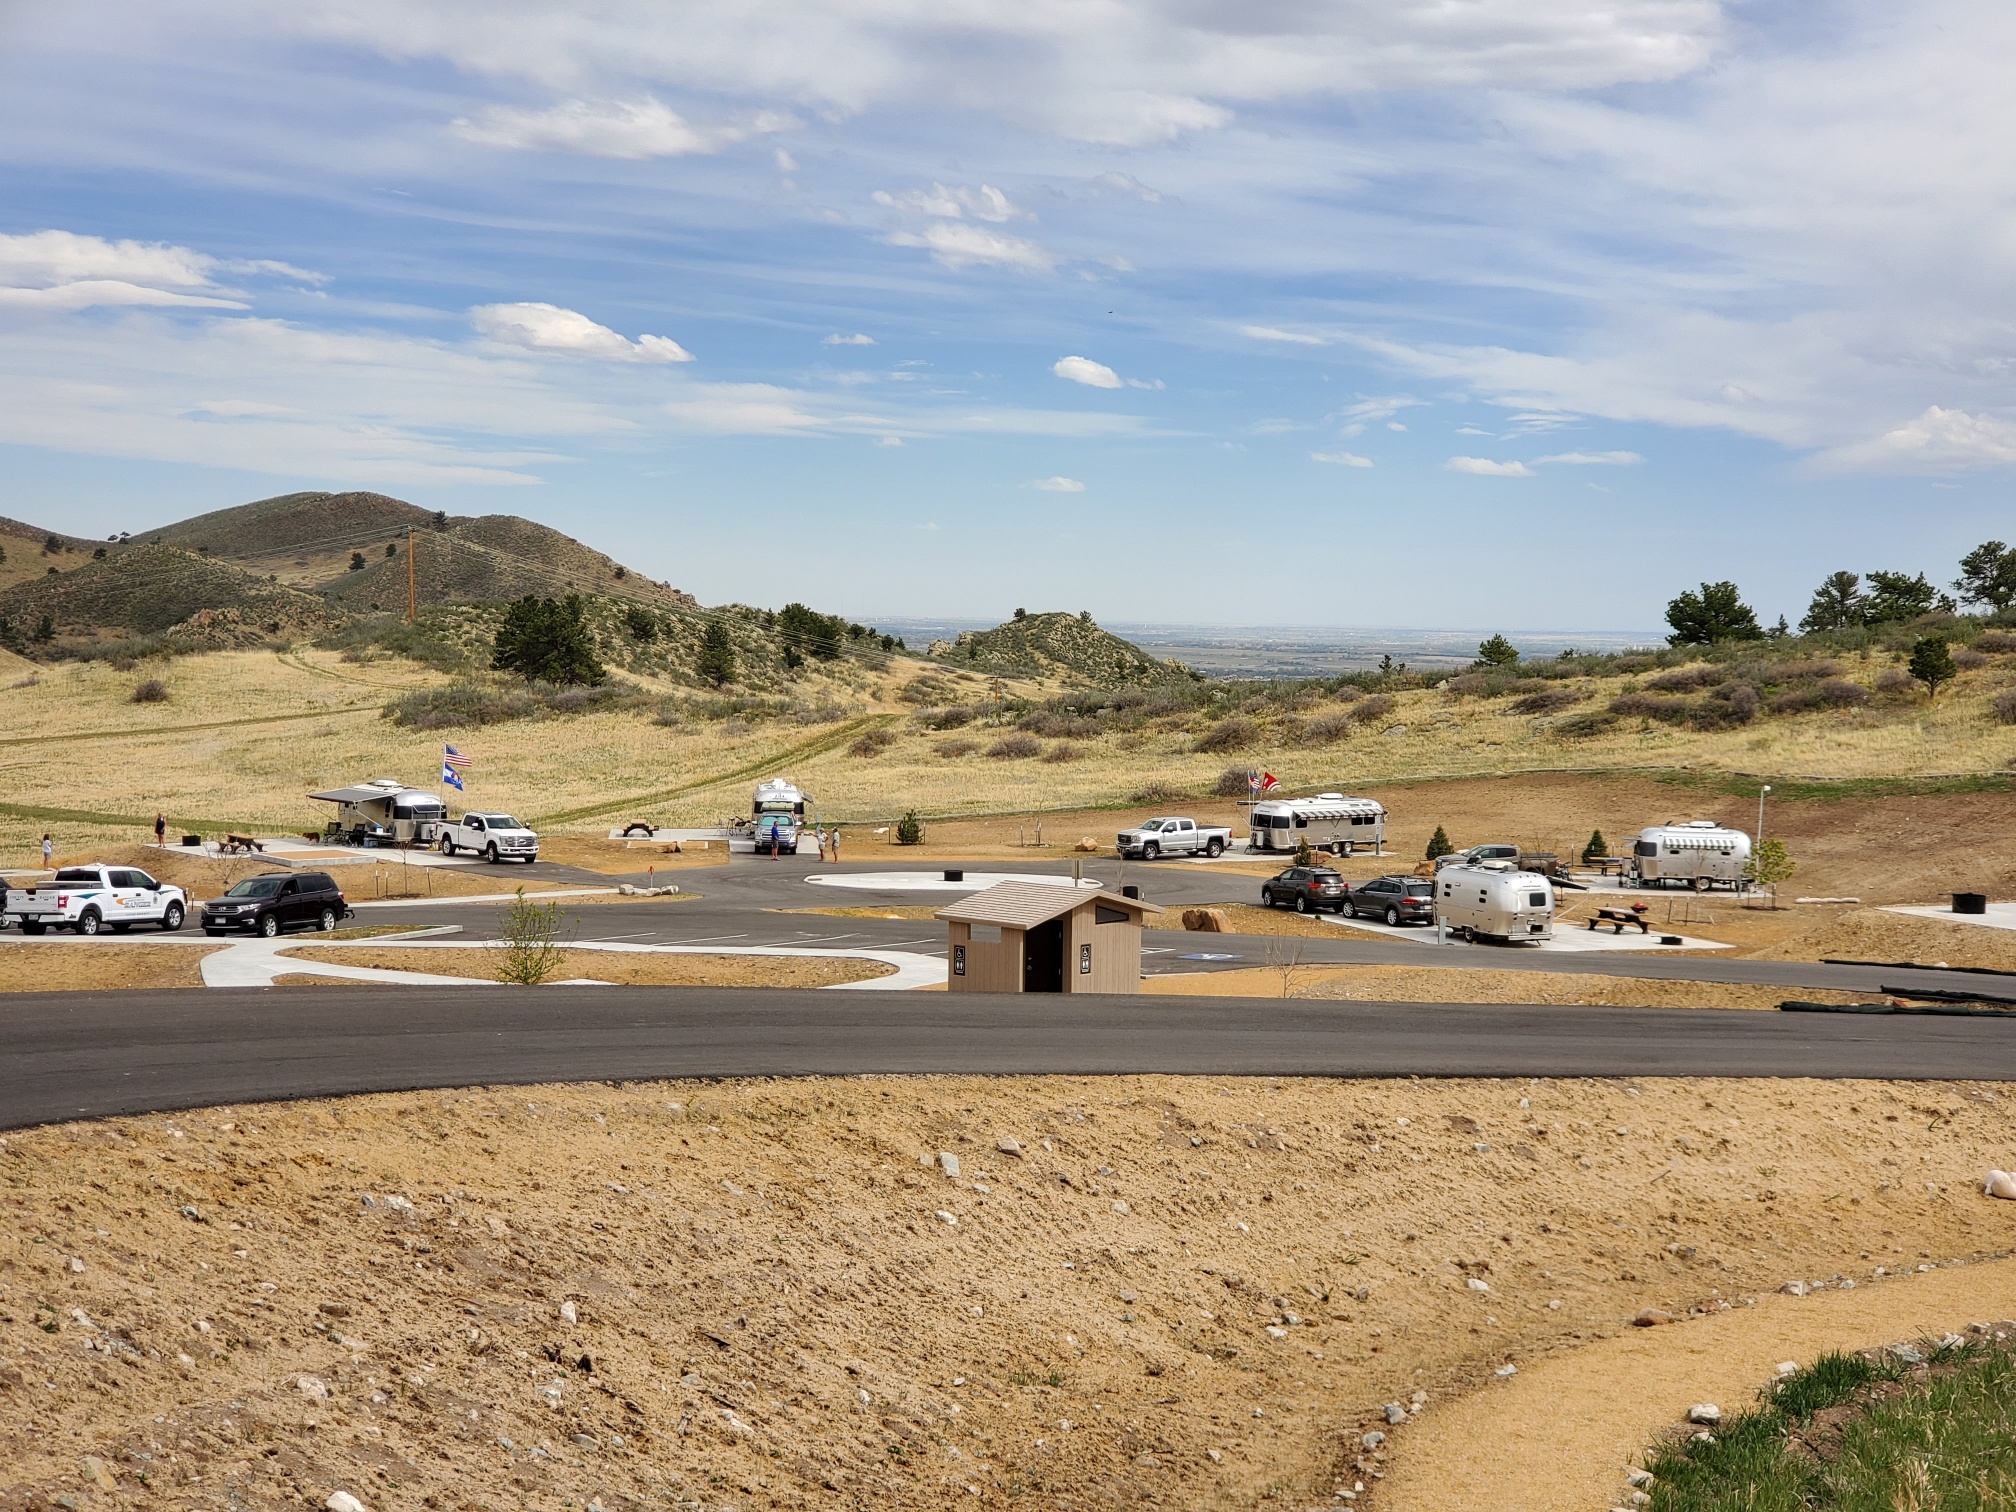 Image 3: Colorado Airstream Club does a test run of Sky View Campground in advance of the campground's public opening on May 20th.